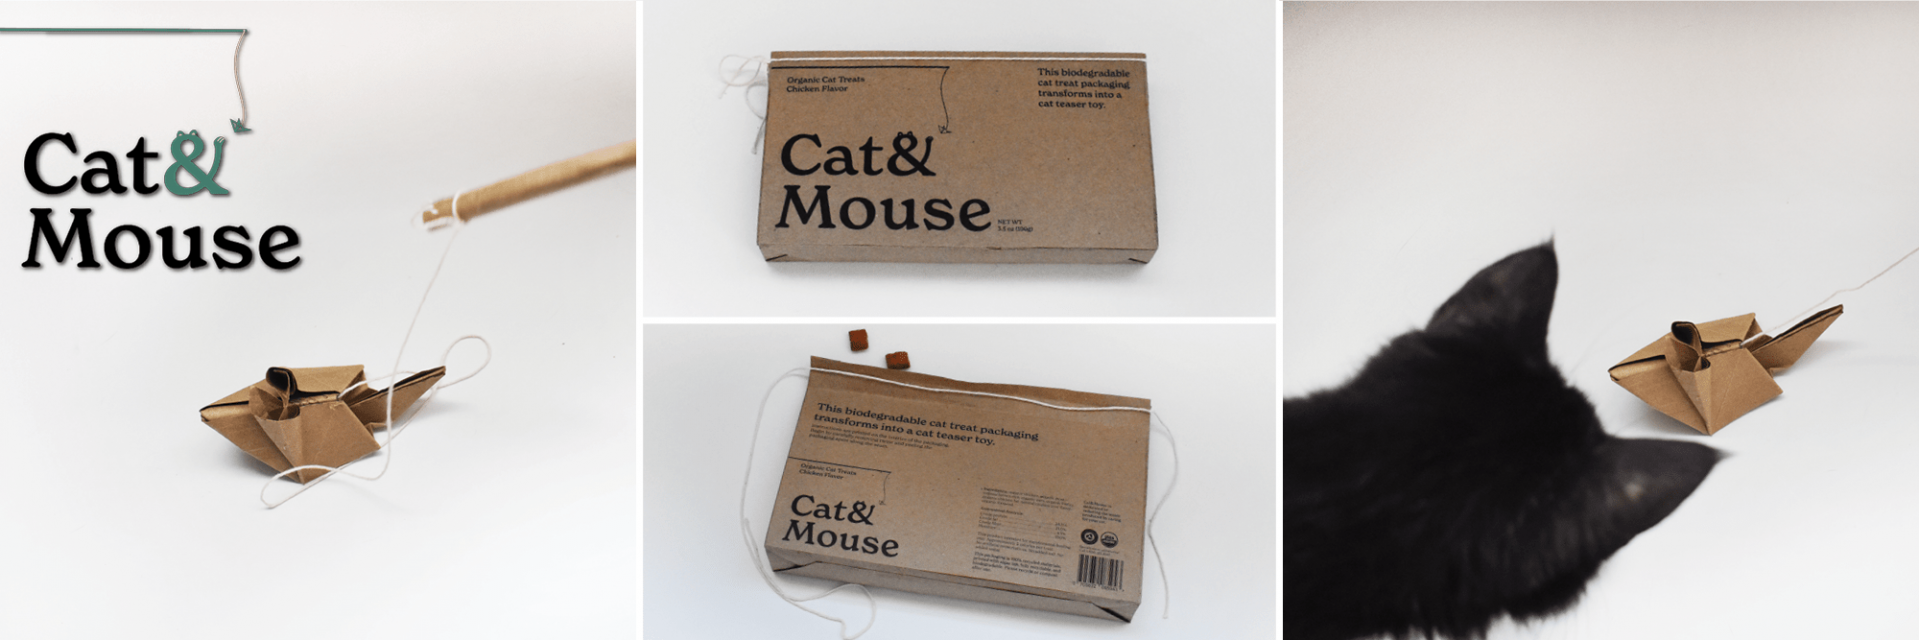 Photos of a box and cat toy